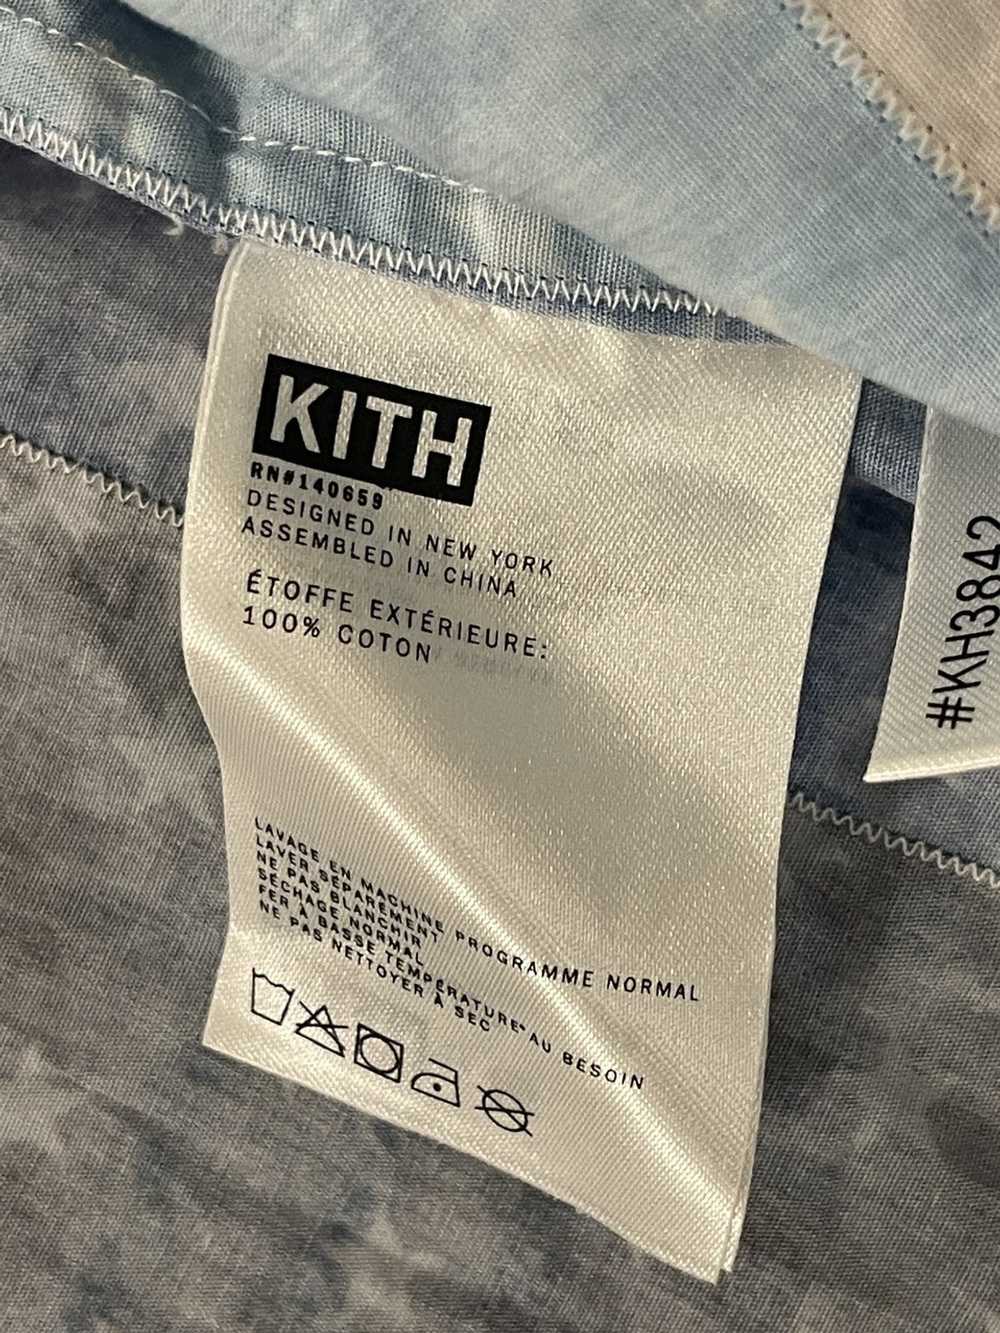 Kith Patch work kith tshirt - image 3